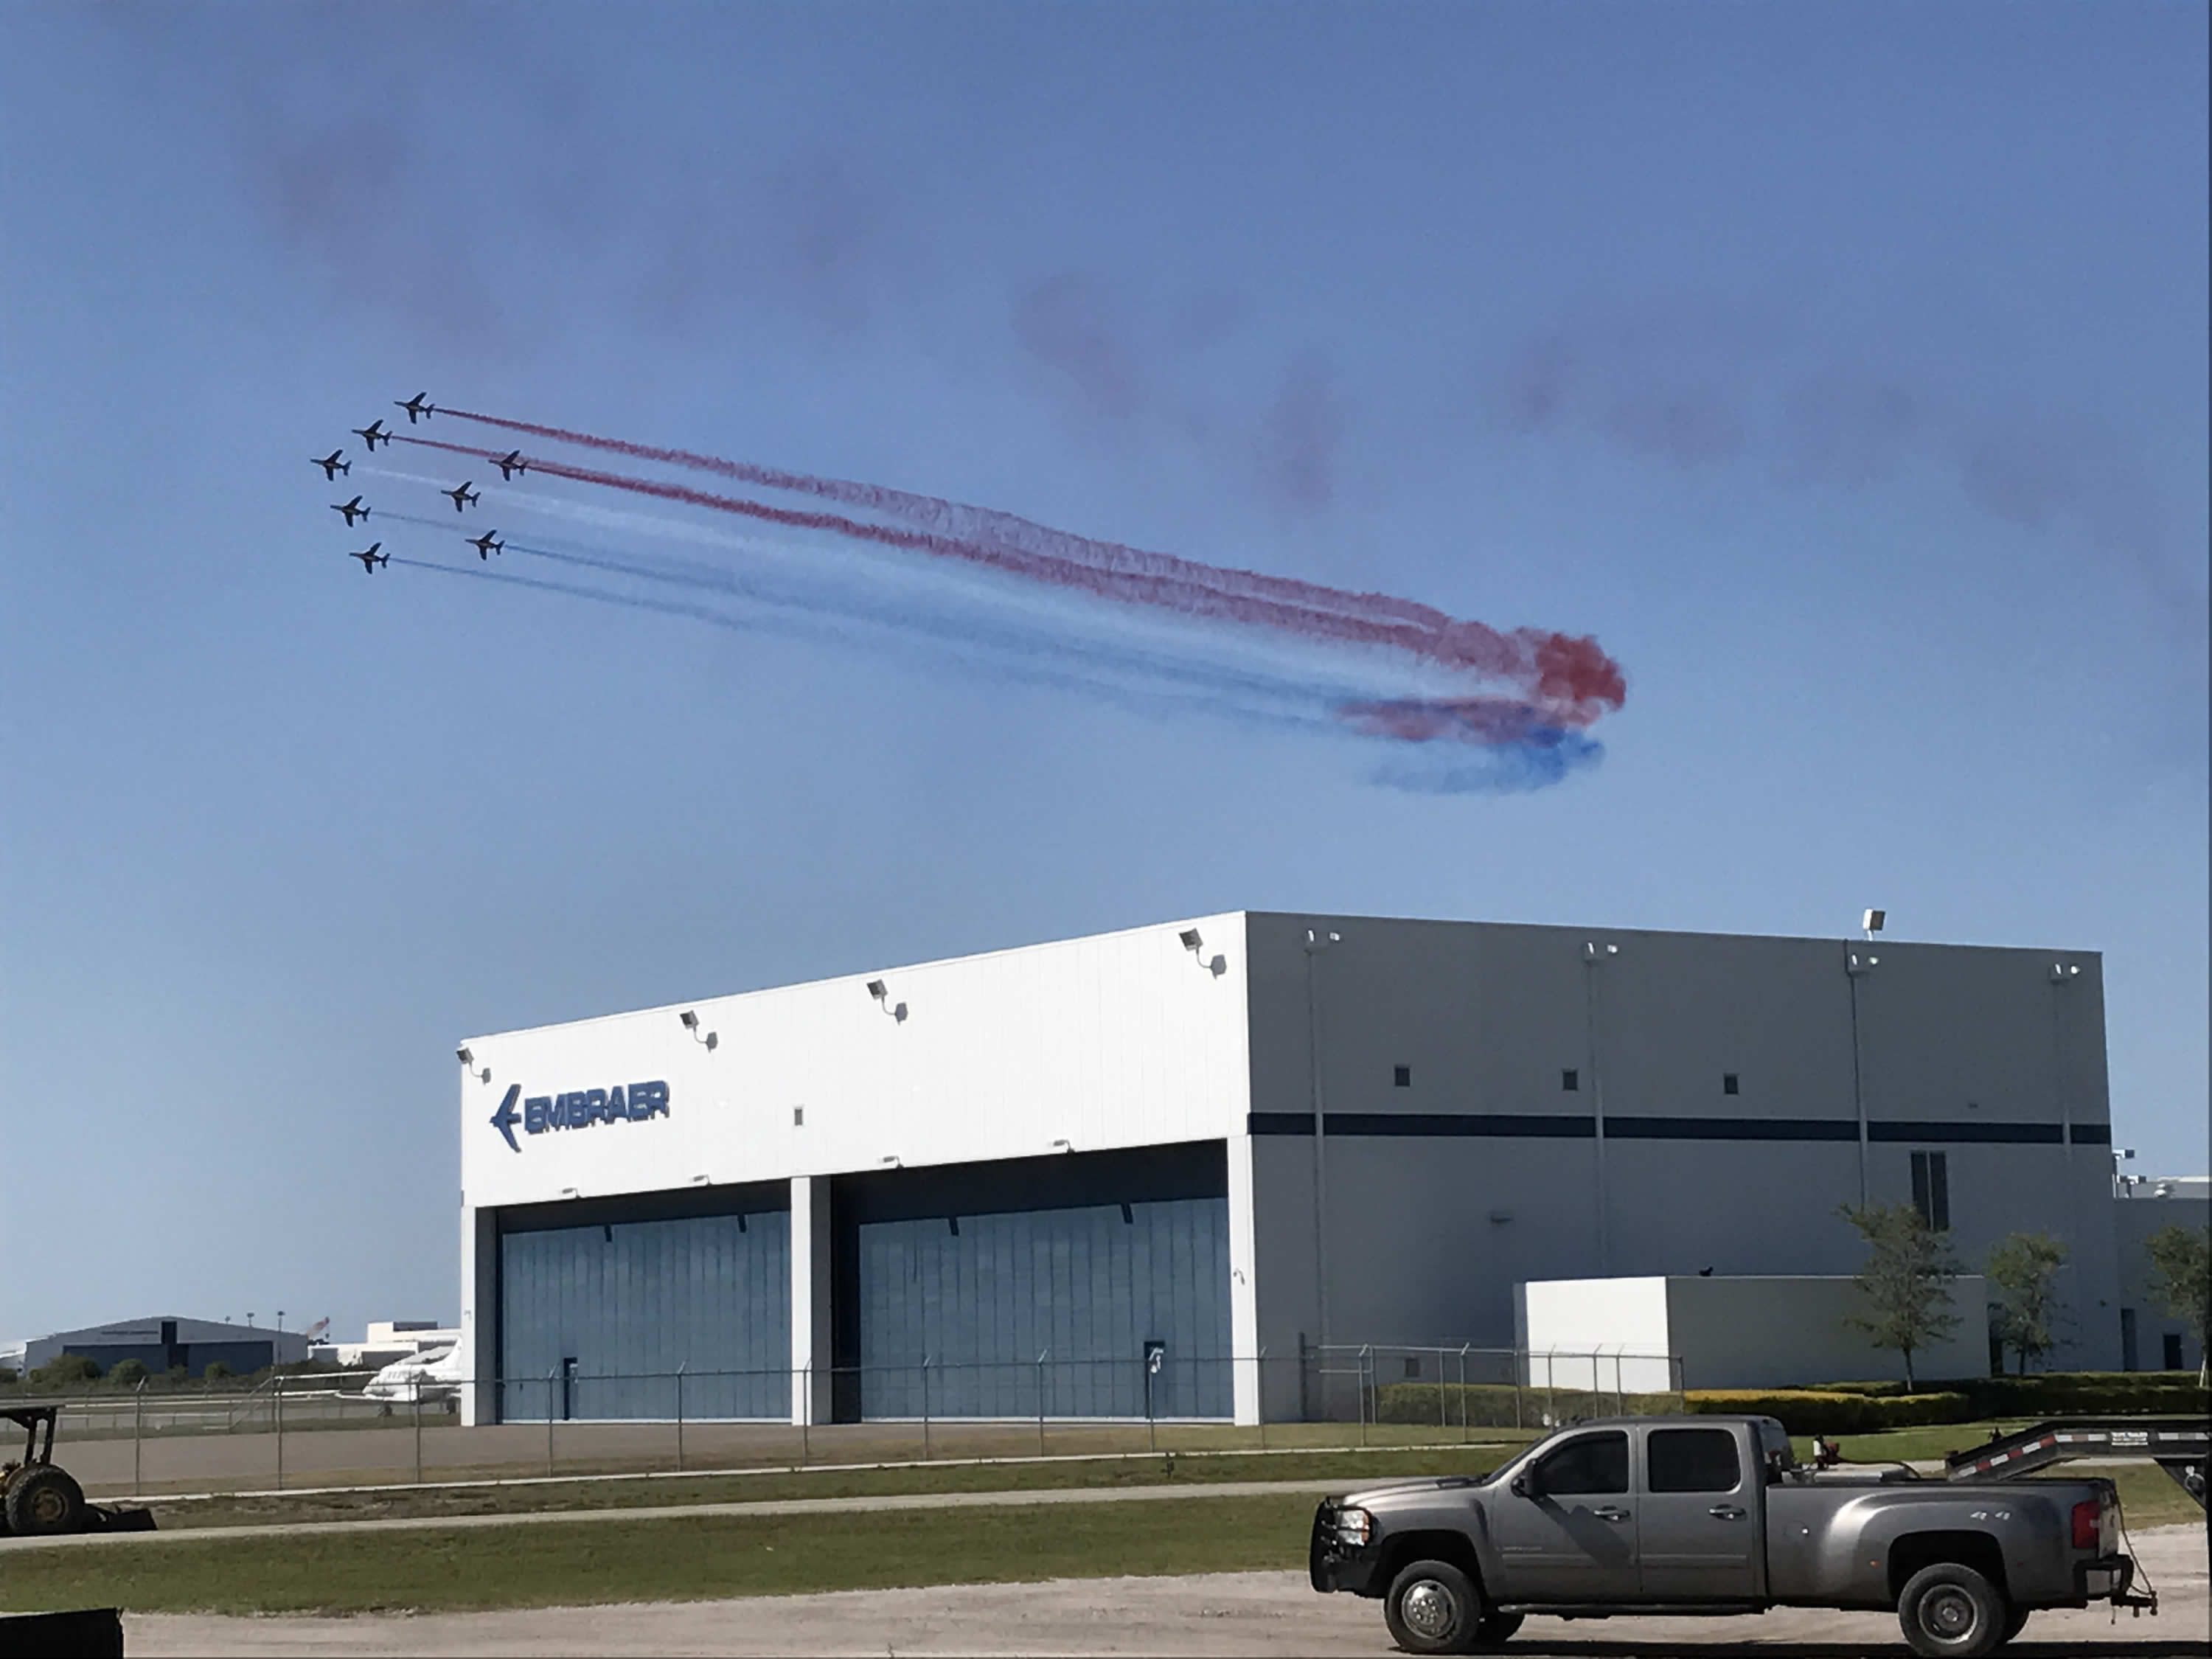 Embraer production facility exterior